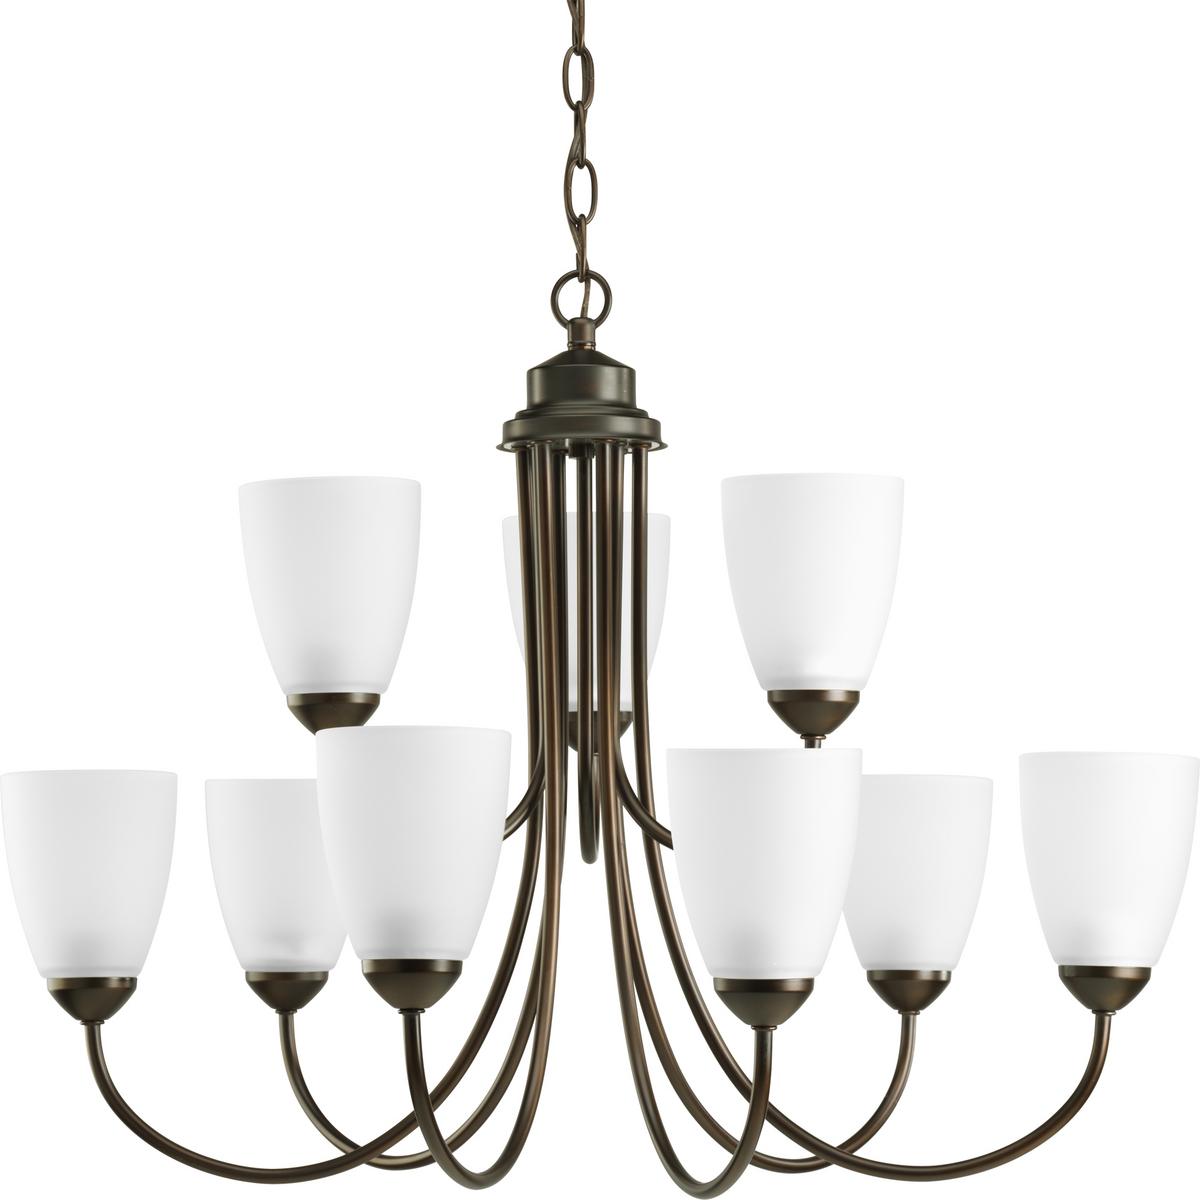 Hubbell P4627-20EBWB Nine-light, two-tier chandelier from Gather possesses a smart simplicity to complement today's home. Antique bronze metal arms descend downwards and curve sharply to prop white etched glass shades. Etched glass add distinction and provide pleasing illumin